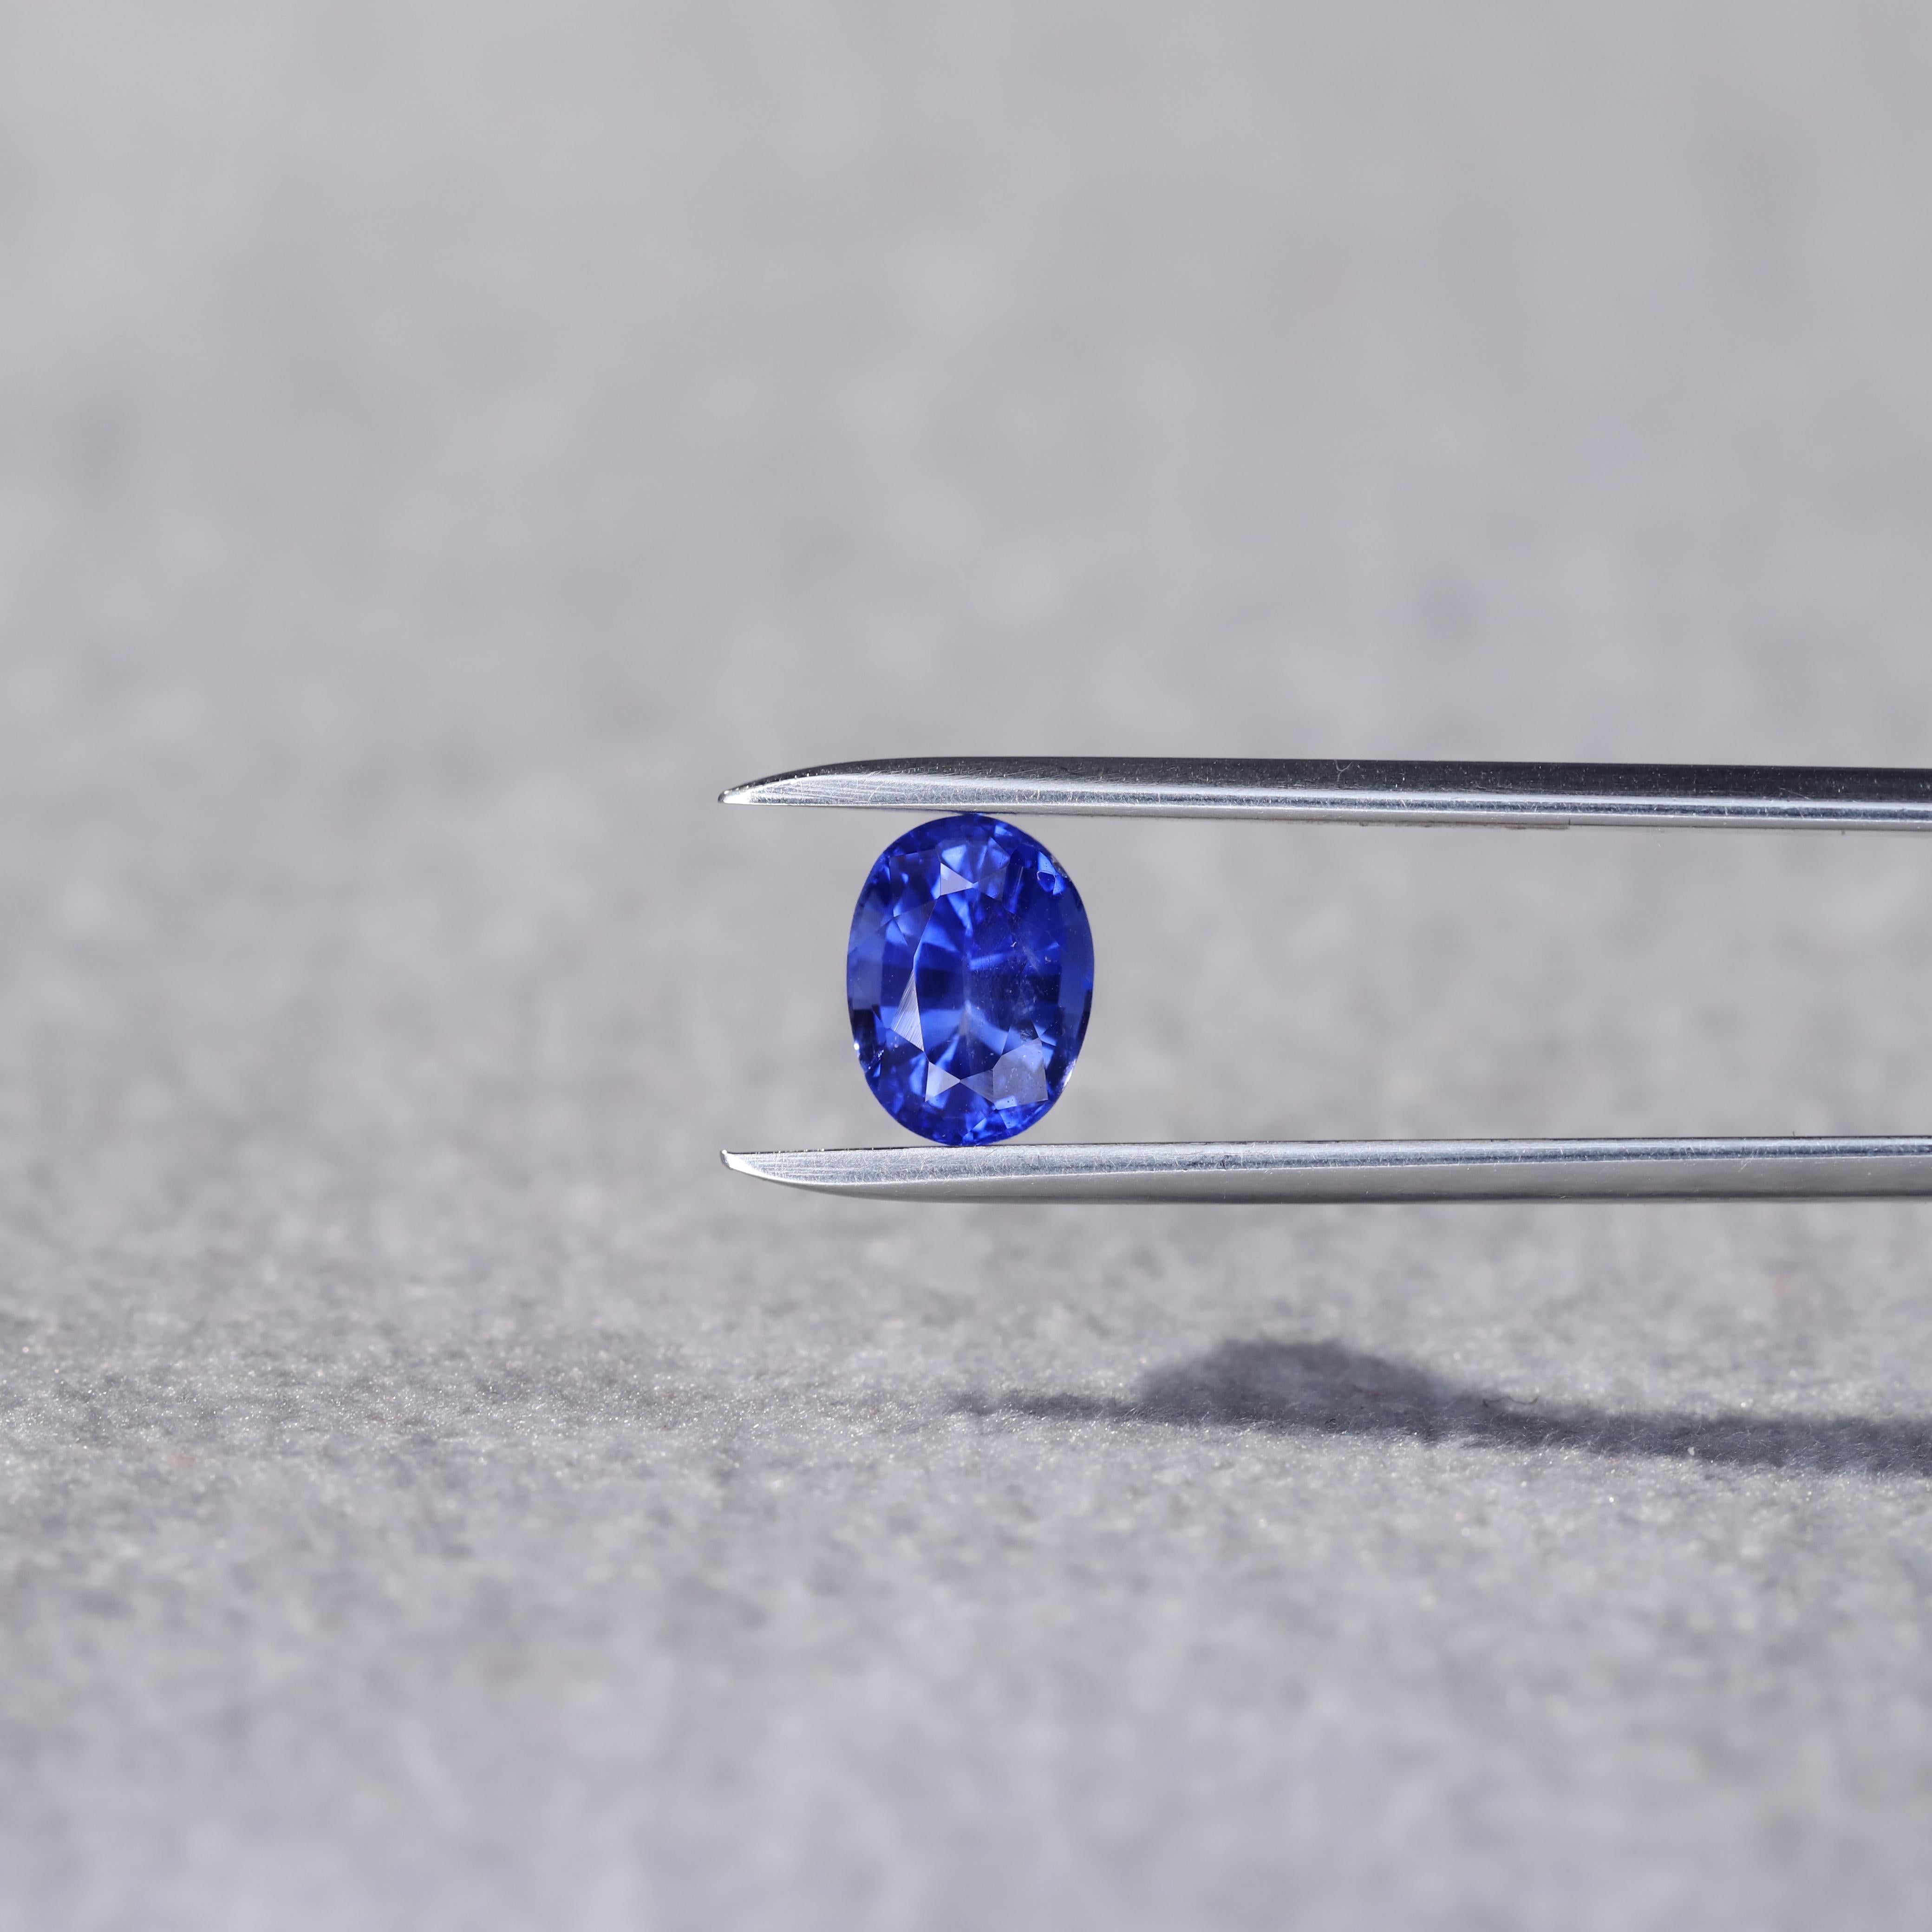 Women's 2.15 Carat Unheated Vivid Blue Natural Sapphire Loose Gemstone from Ceylon For Sale